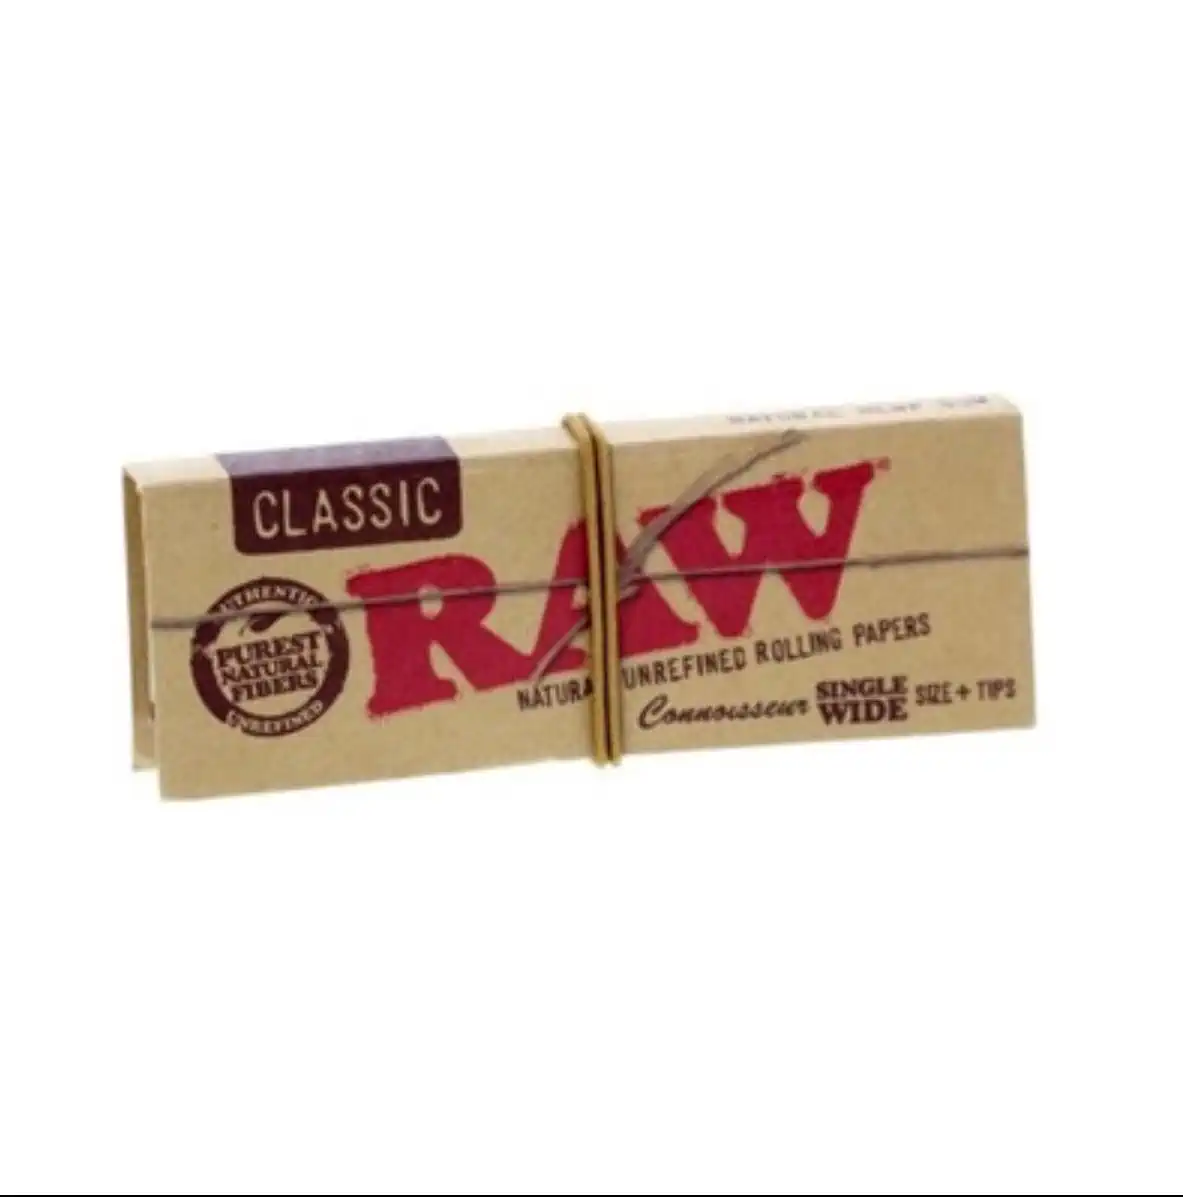 Бумажки Raw classic connosseur single wide size+tips